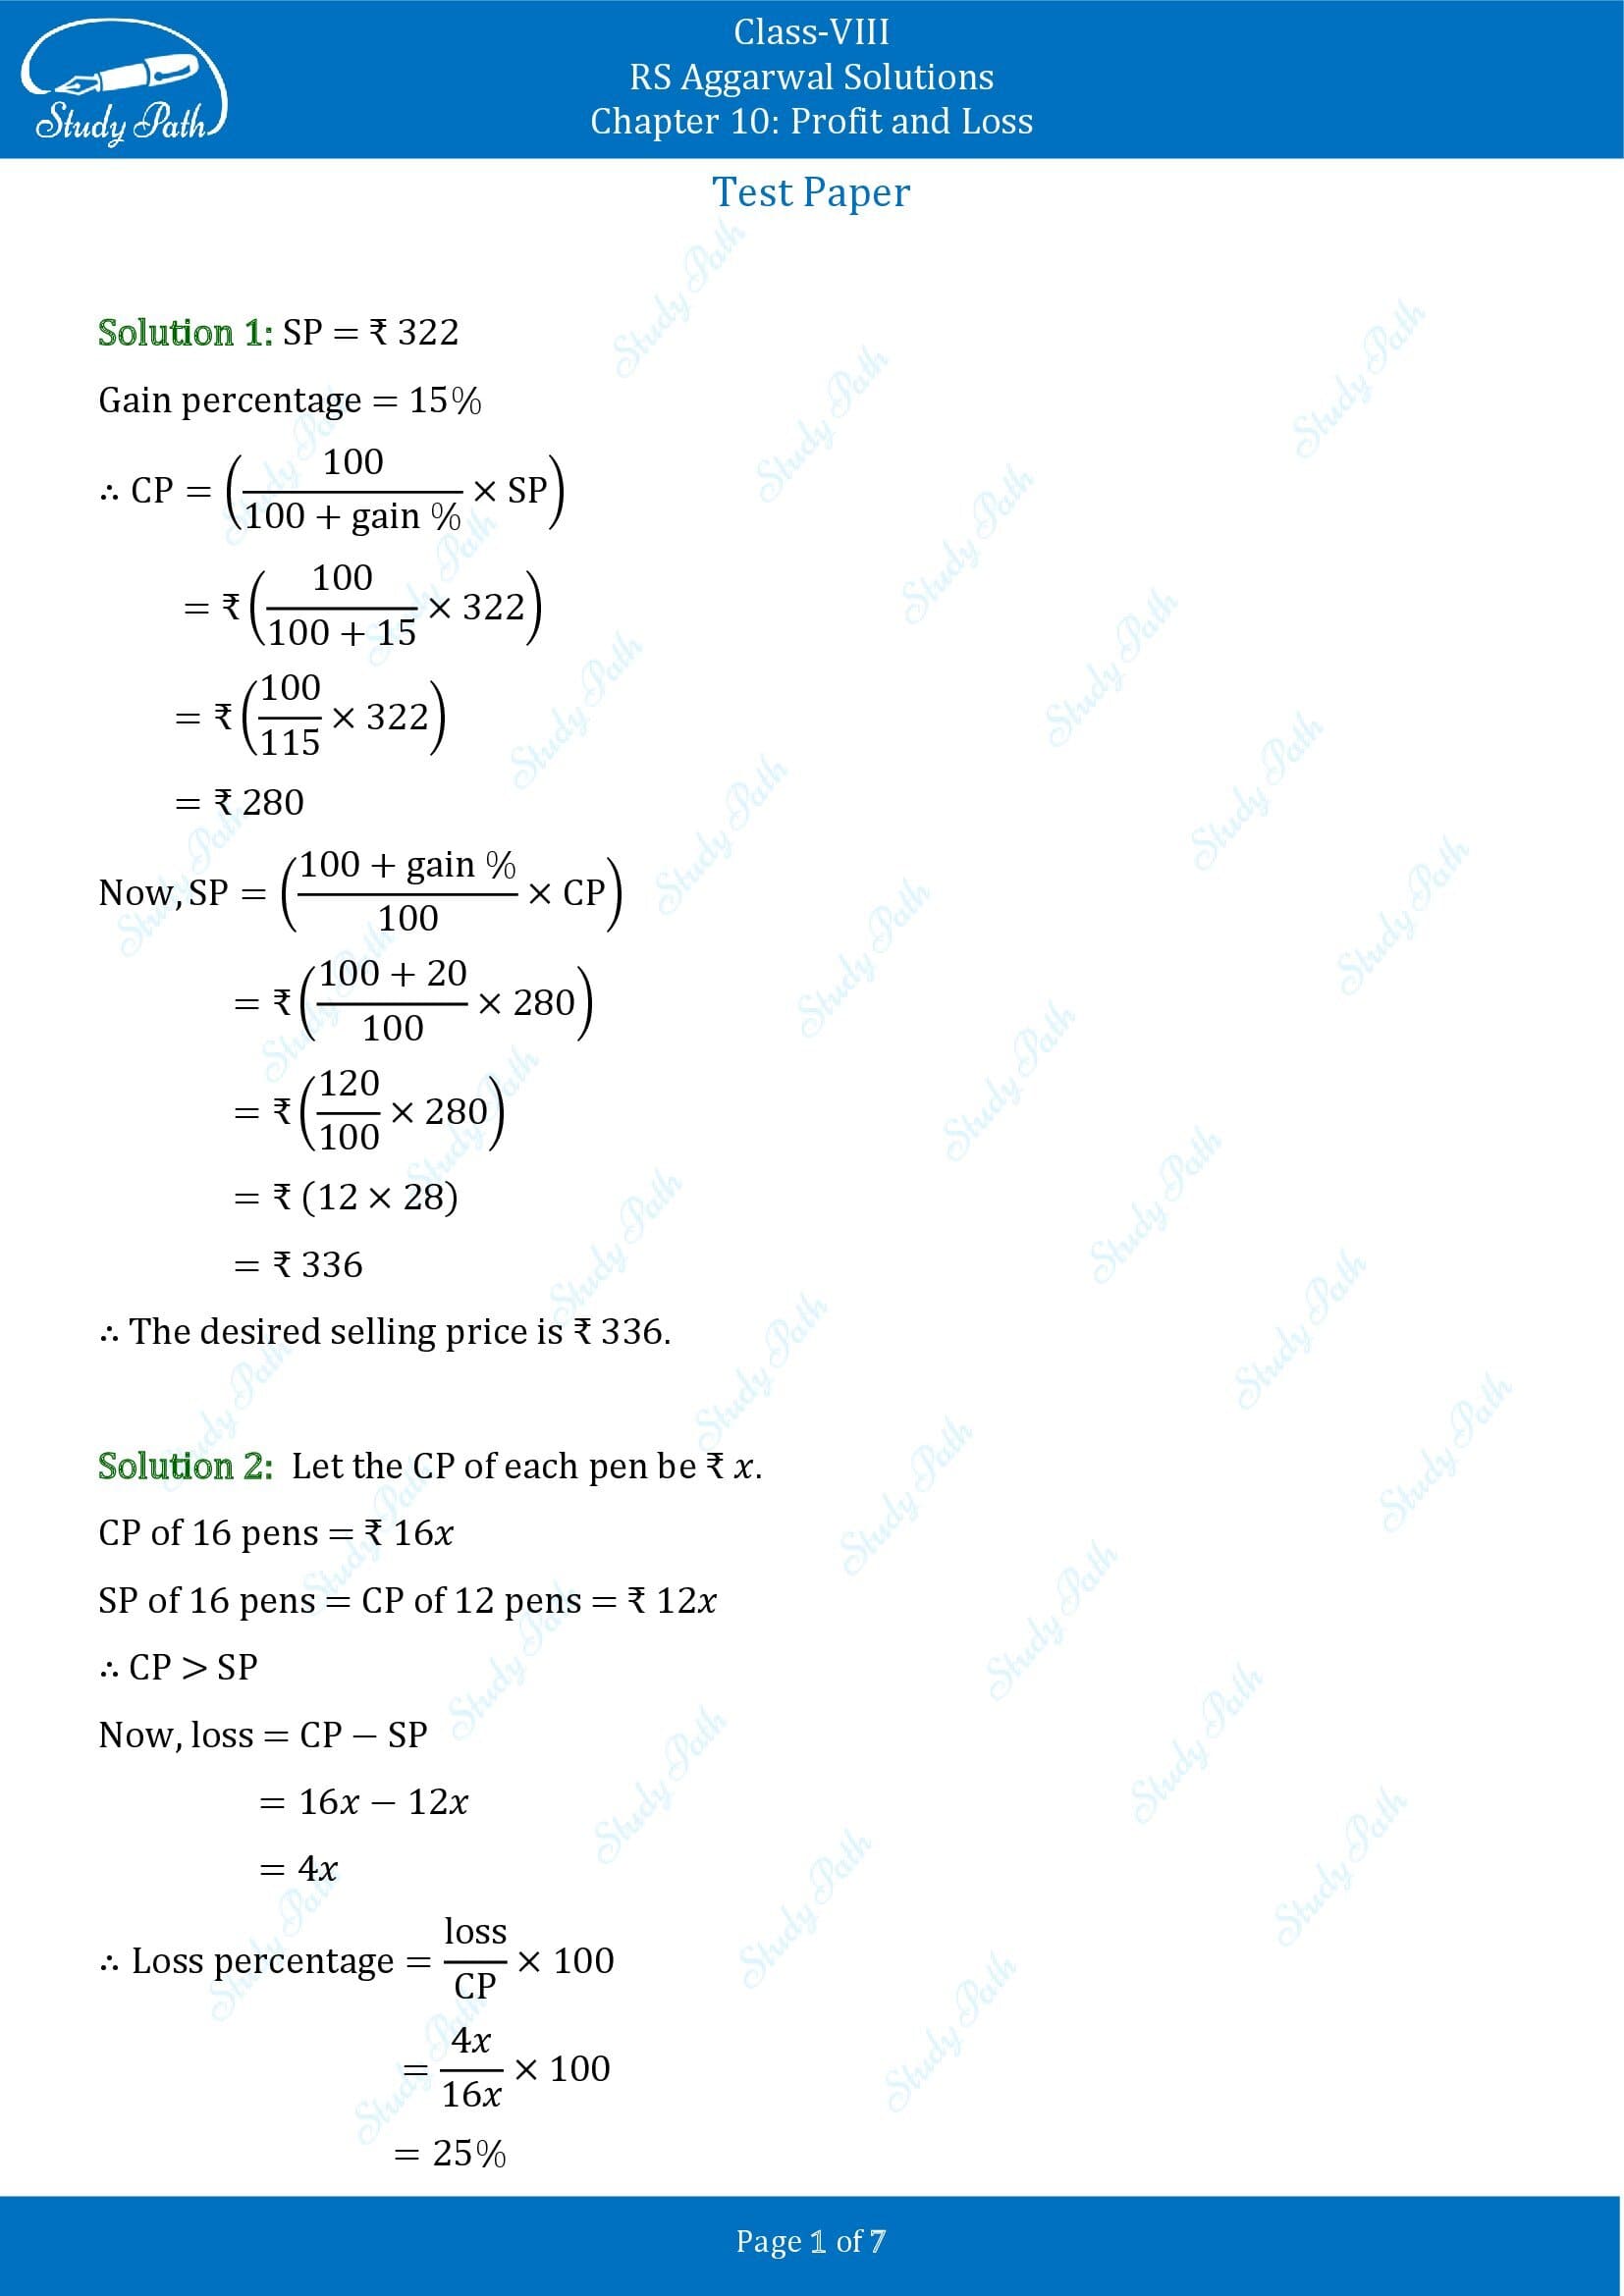 RS Aggarwal Solutions Class 8 Chapter 10 Profit and Loss Test Paper 00001